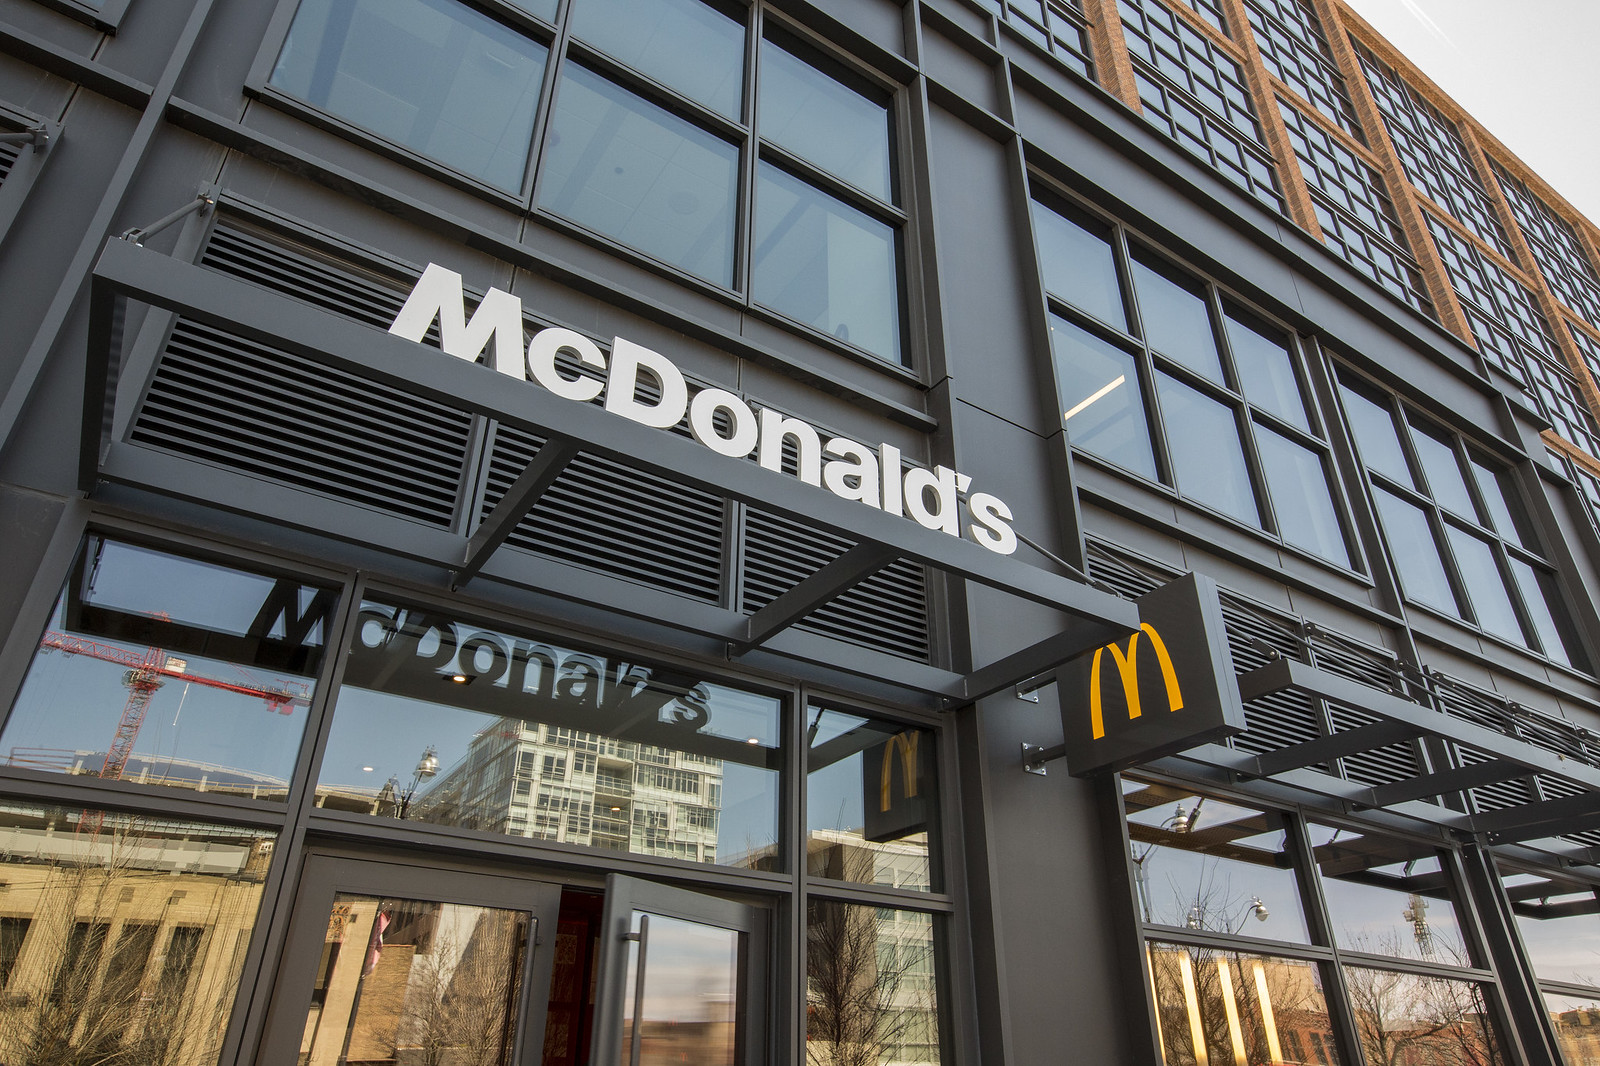 A glassed office building with the golden “McDonald’s” logo.